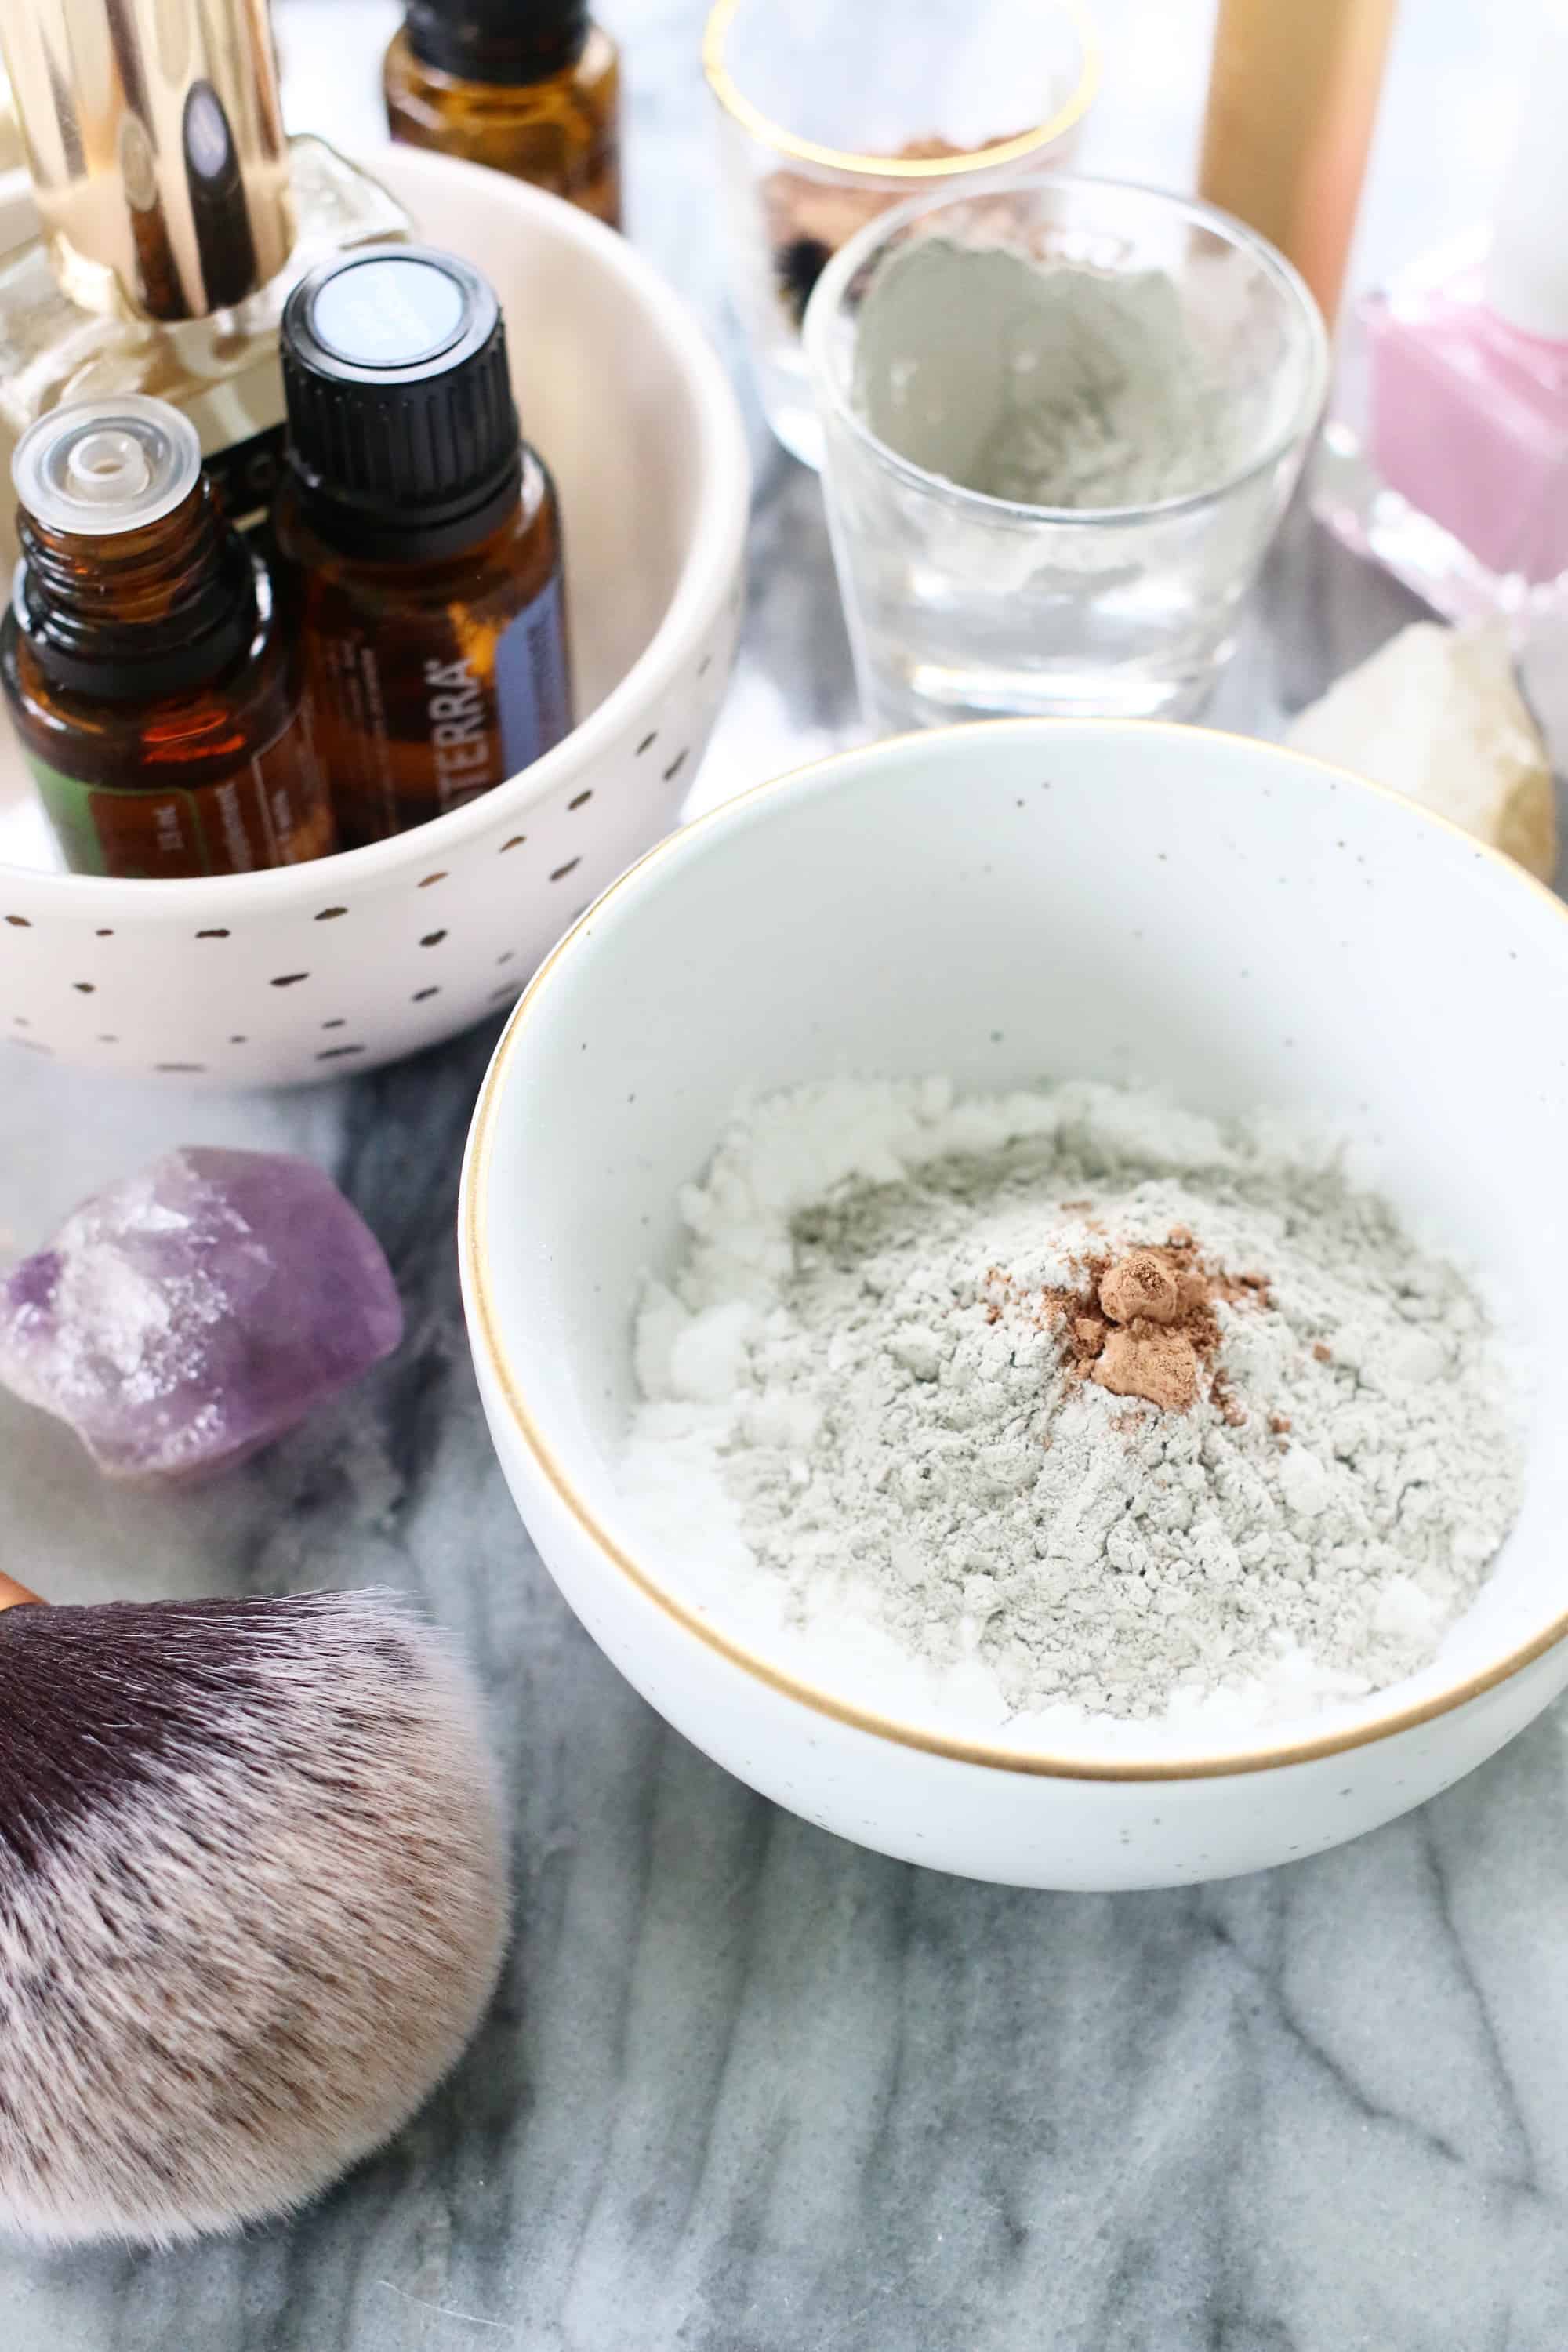 Make Your Own Nontoxic Dry Shampoo! - A Beautiful Mess